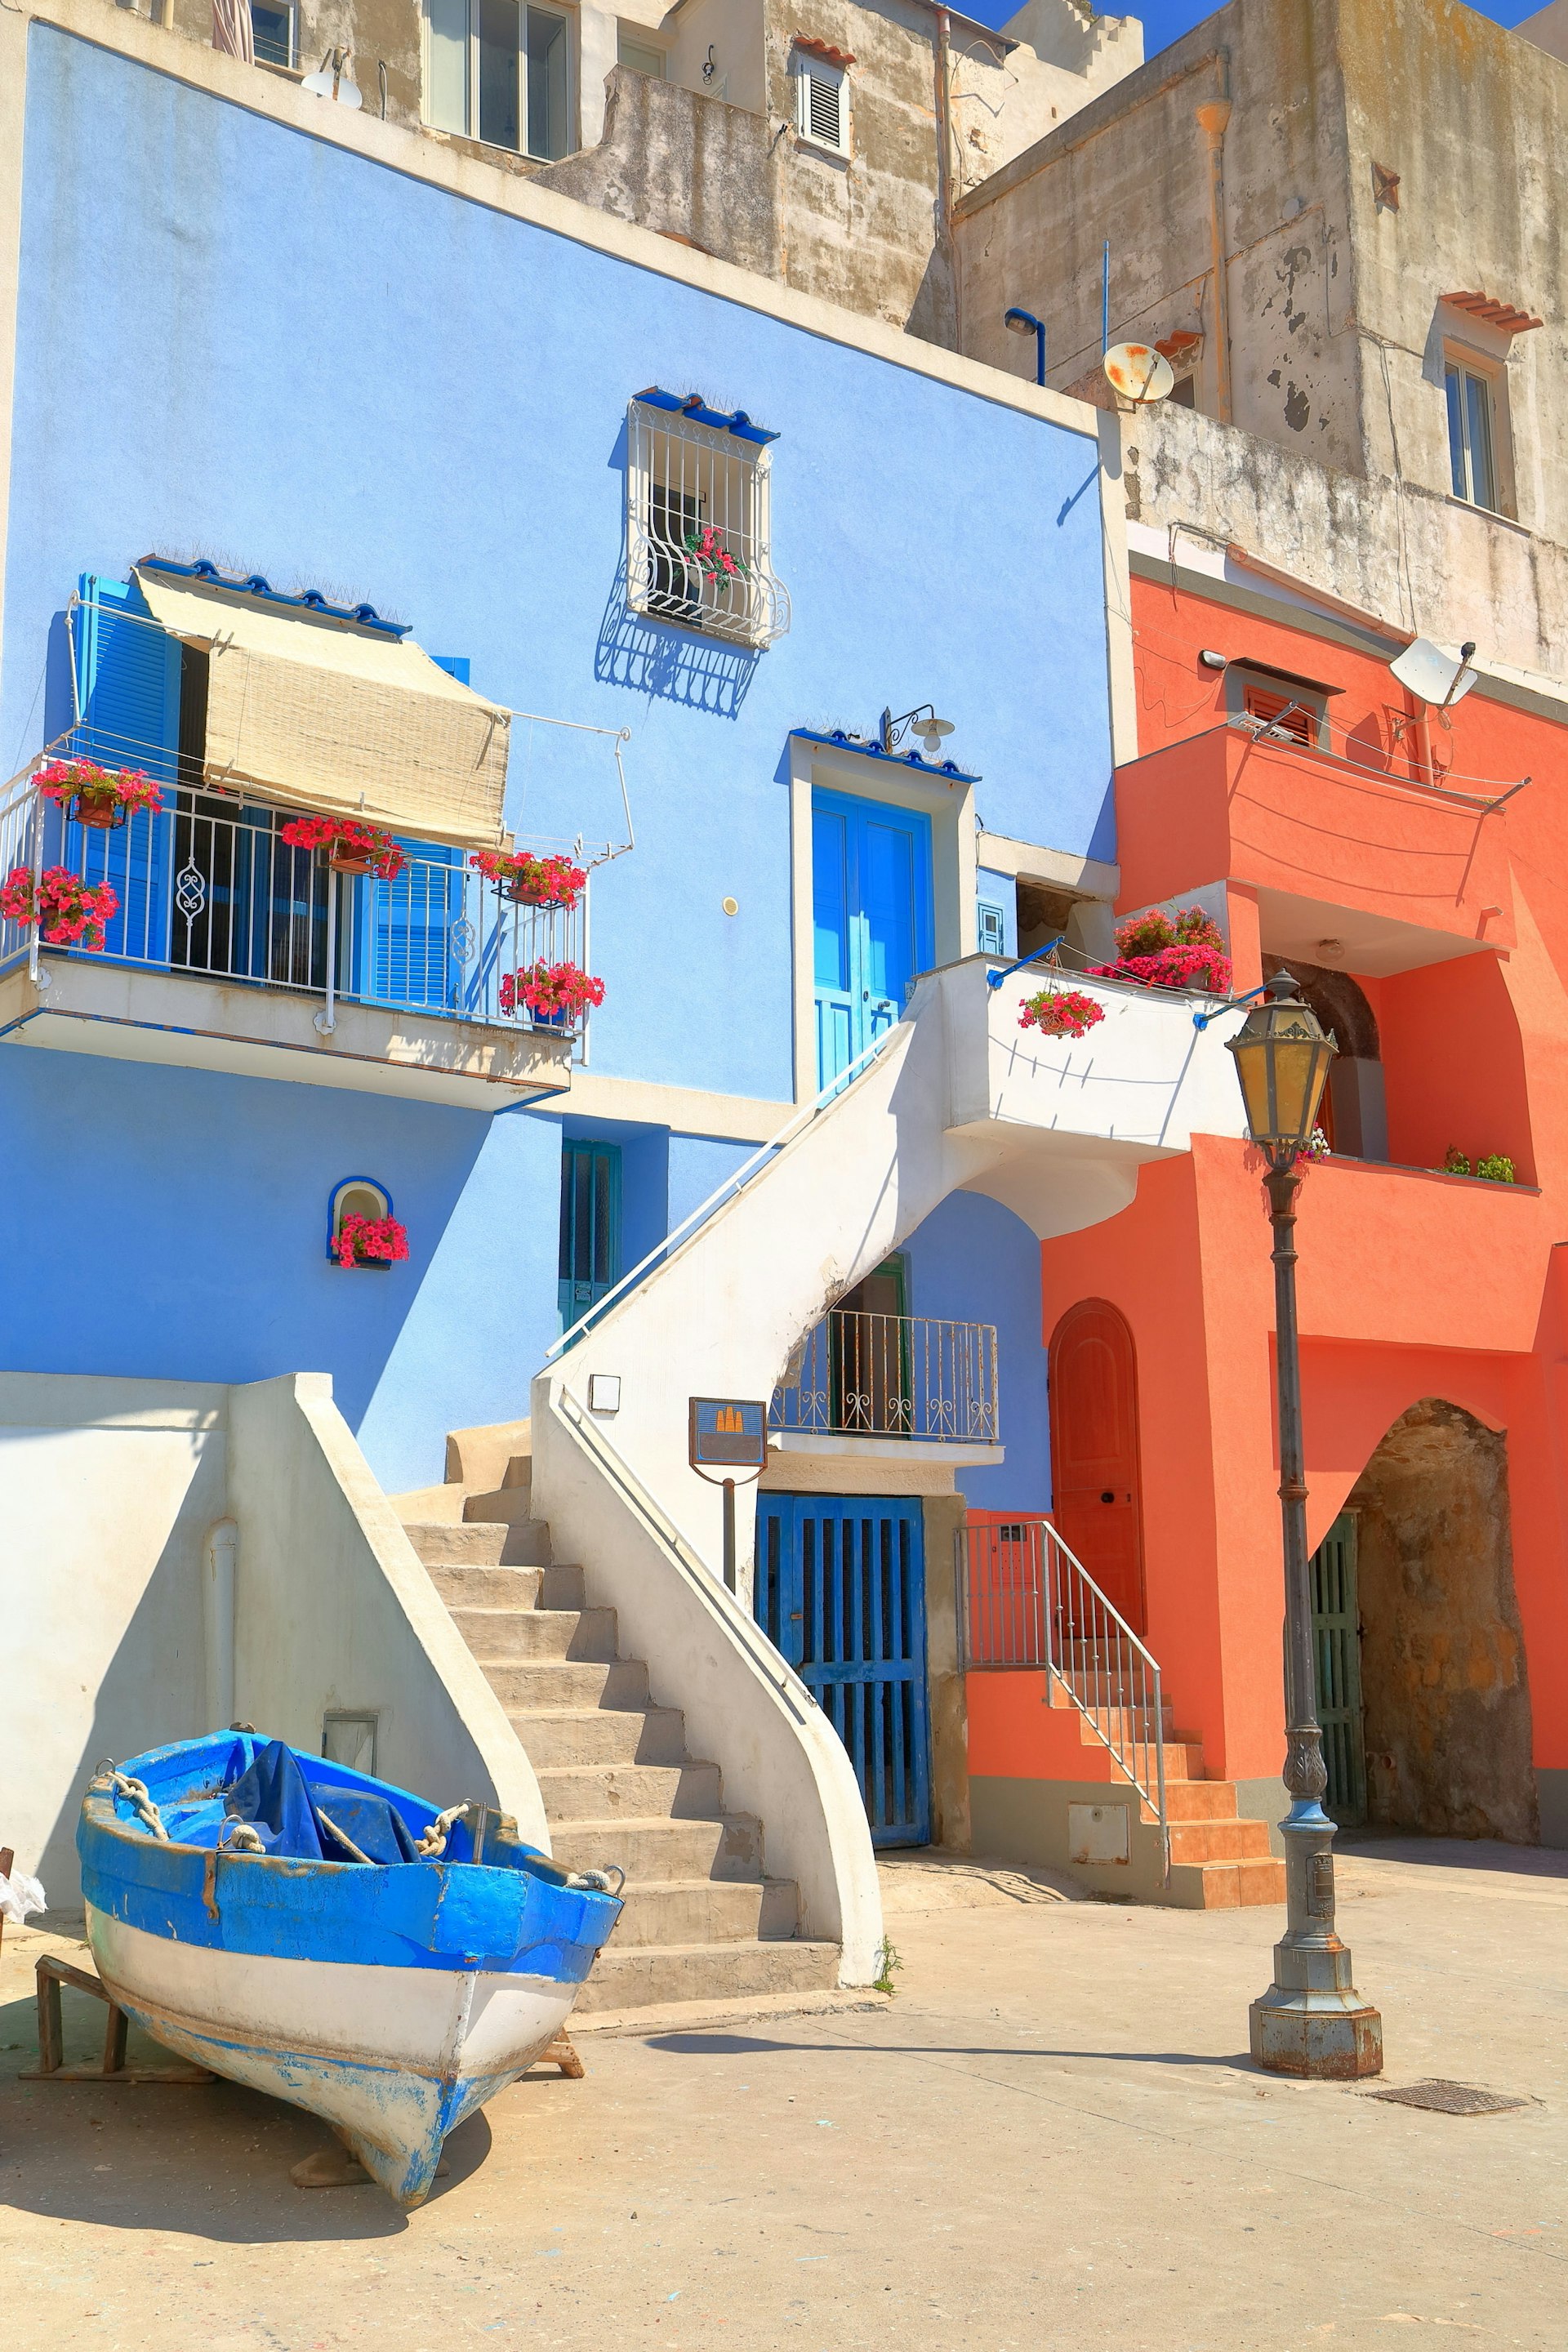 A close-up picture of Procida's colourful houses